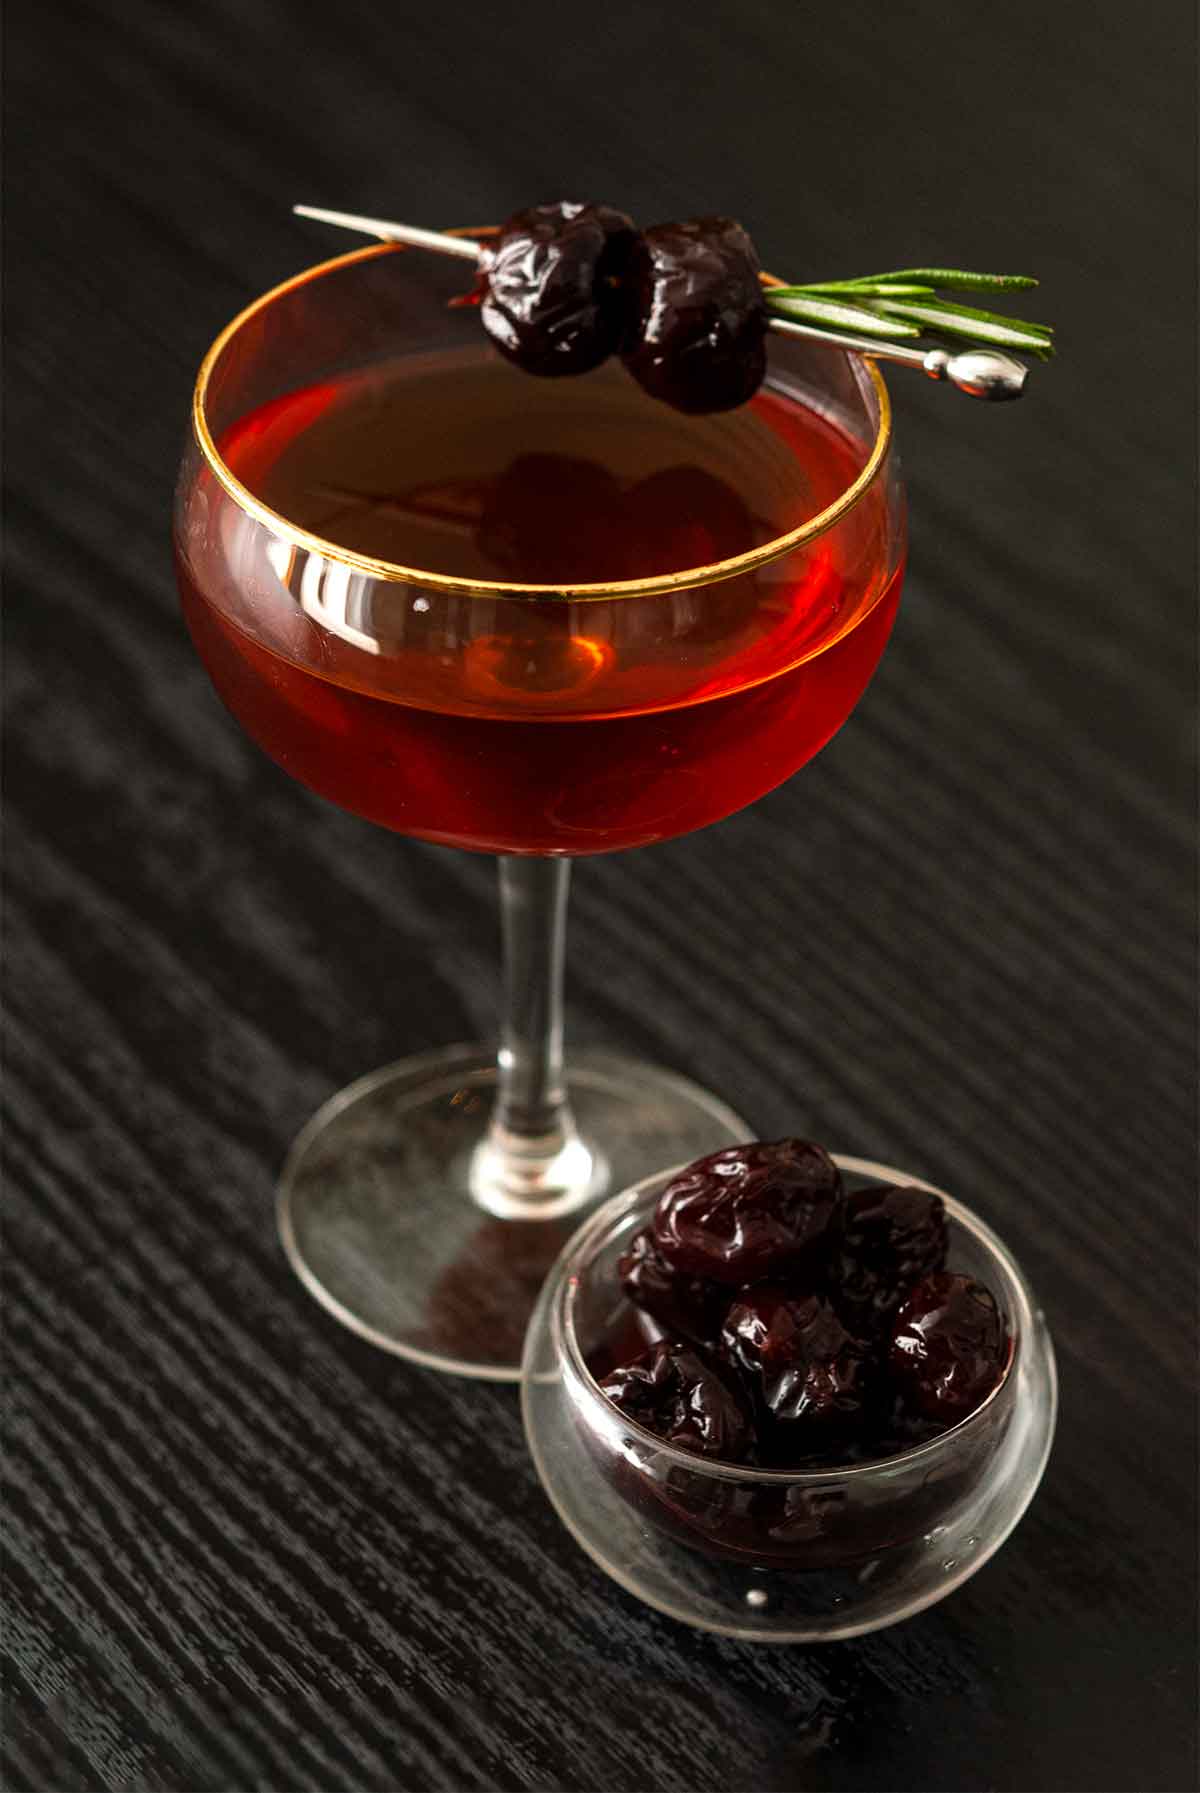 A cocktail garnished with 2 cherries and rosemary on a table with a small bowl of cherries.